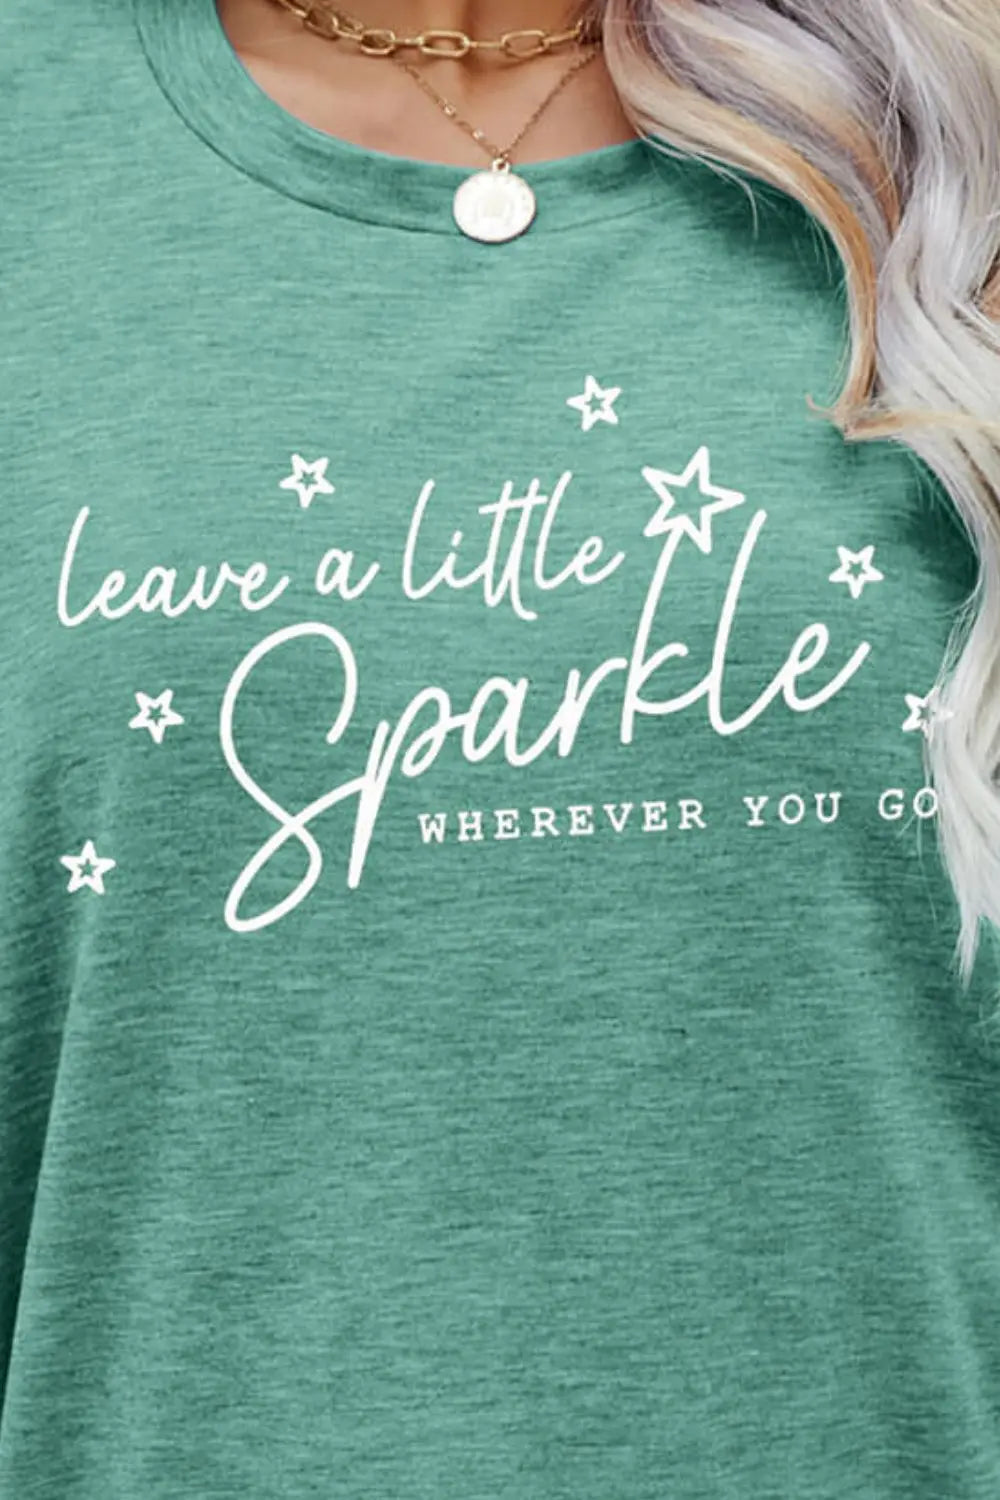 LEAVE A LITTLE SPARKLE WHEREVER YOU GO Tee Shirt - Image #6